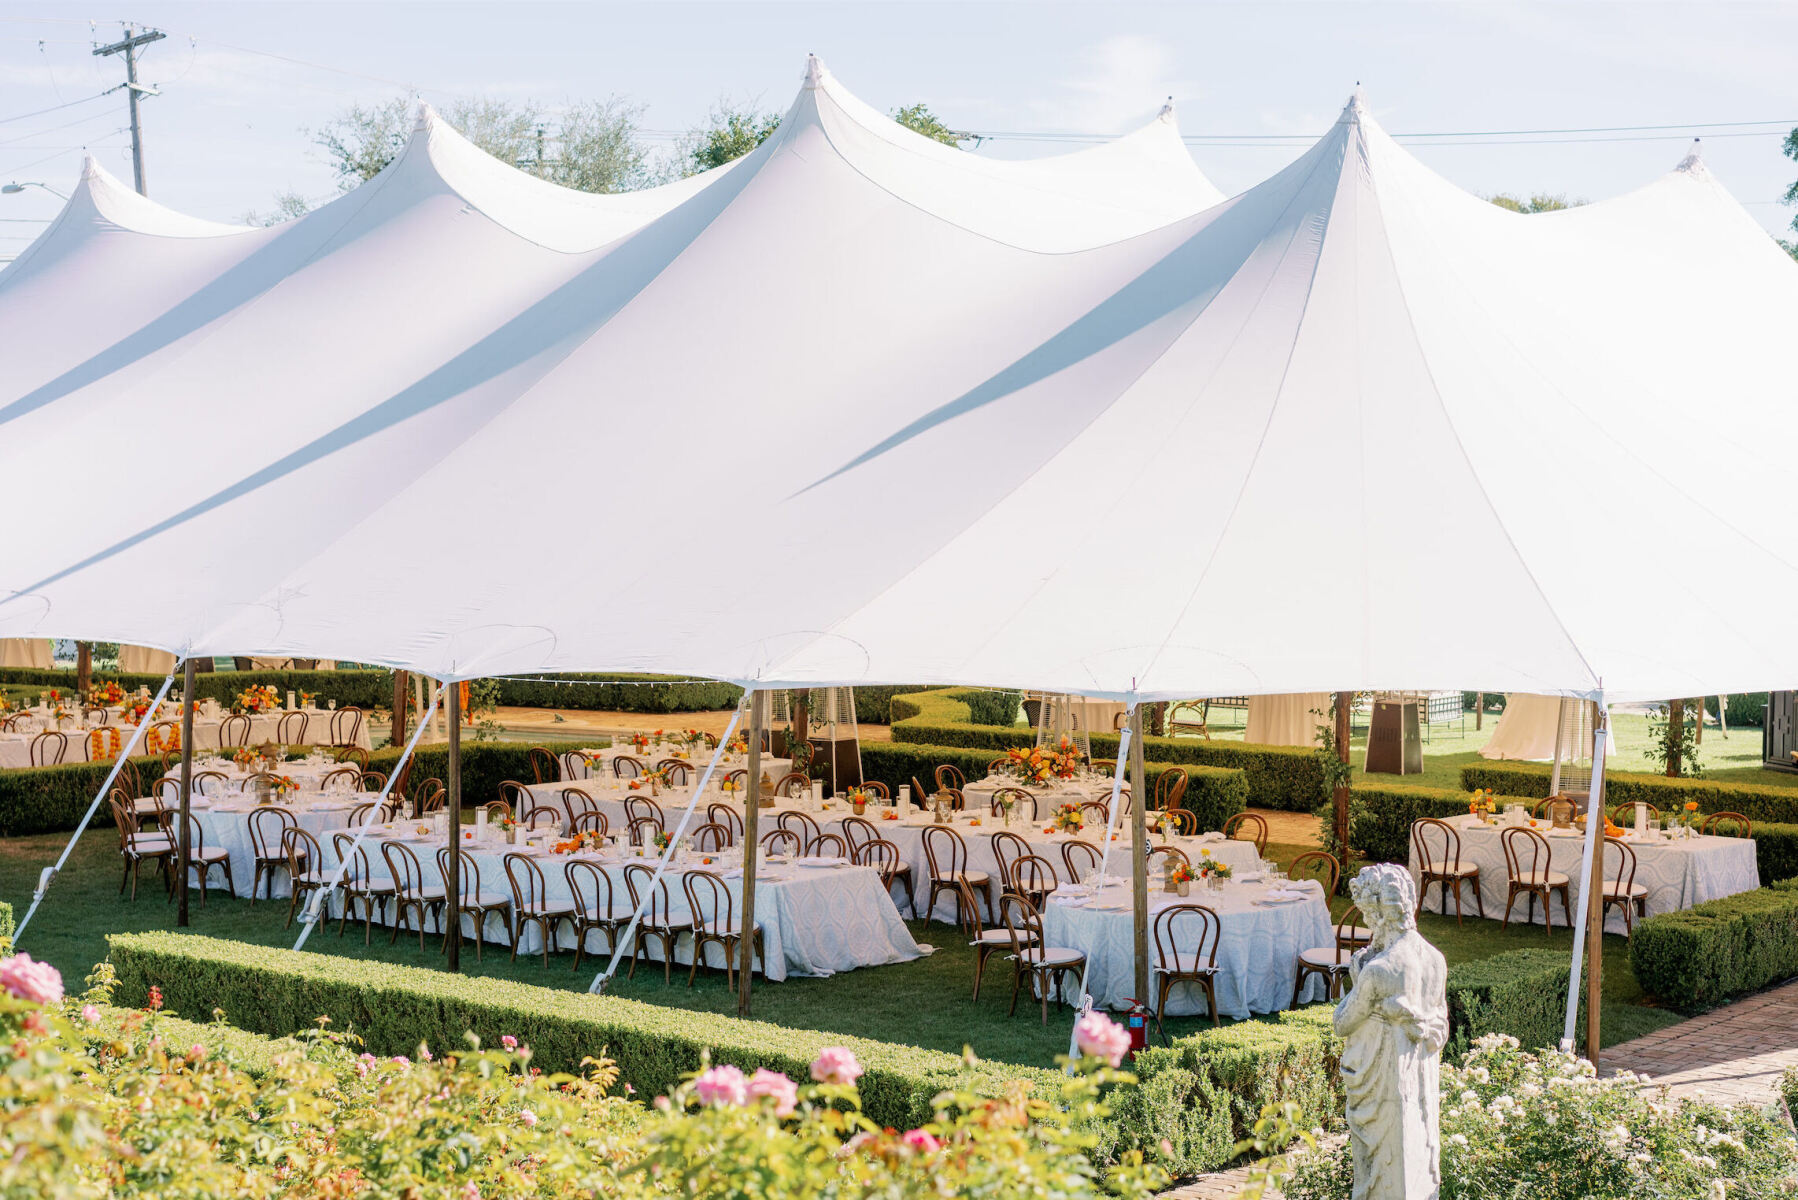 A sailcloth tent was used for the reception at an Indian fusion wedding.